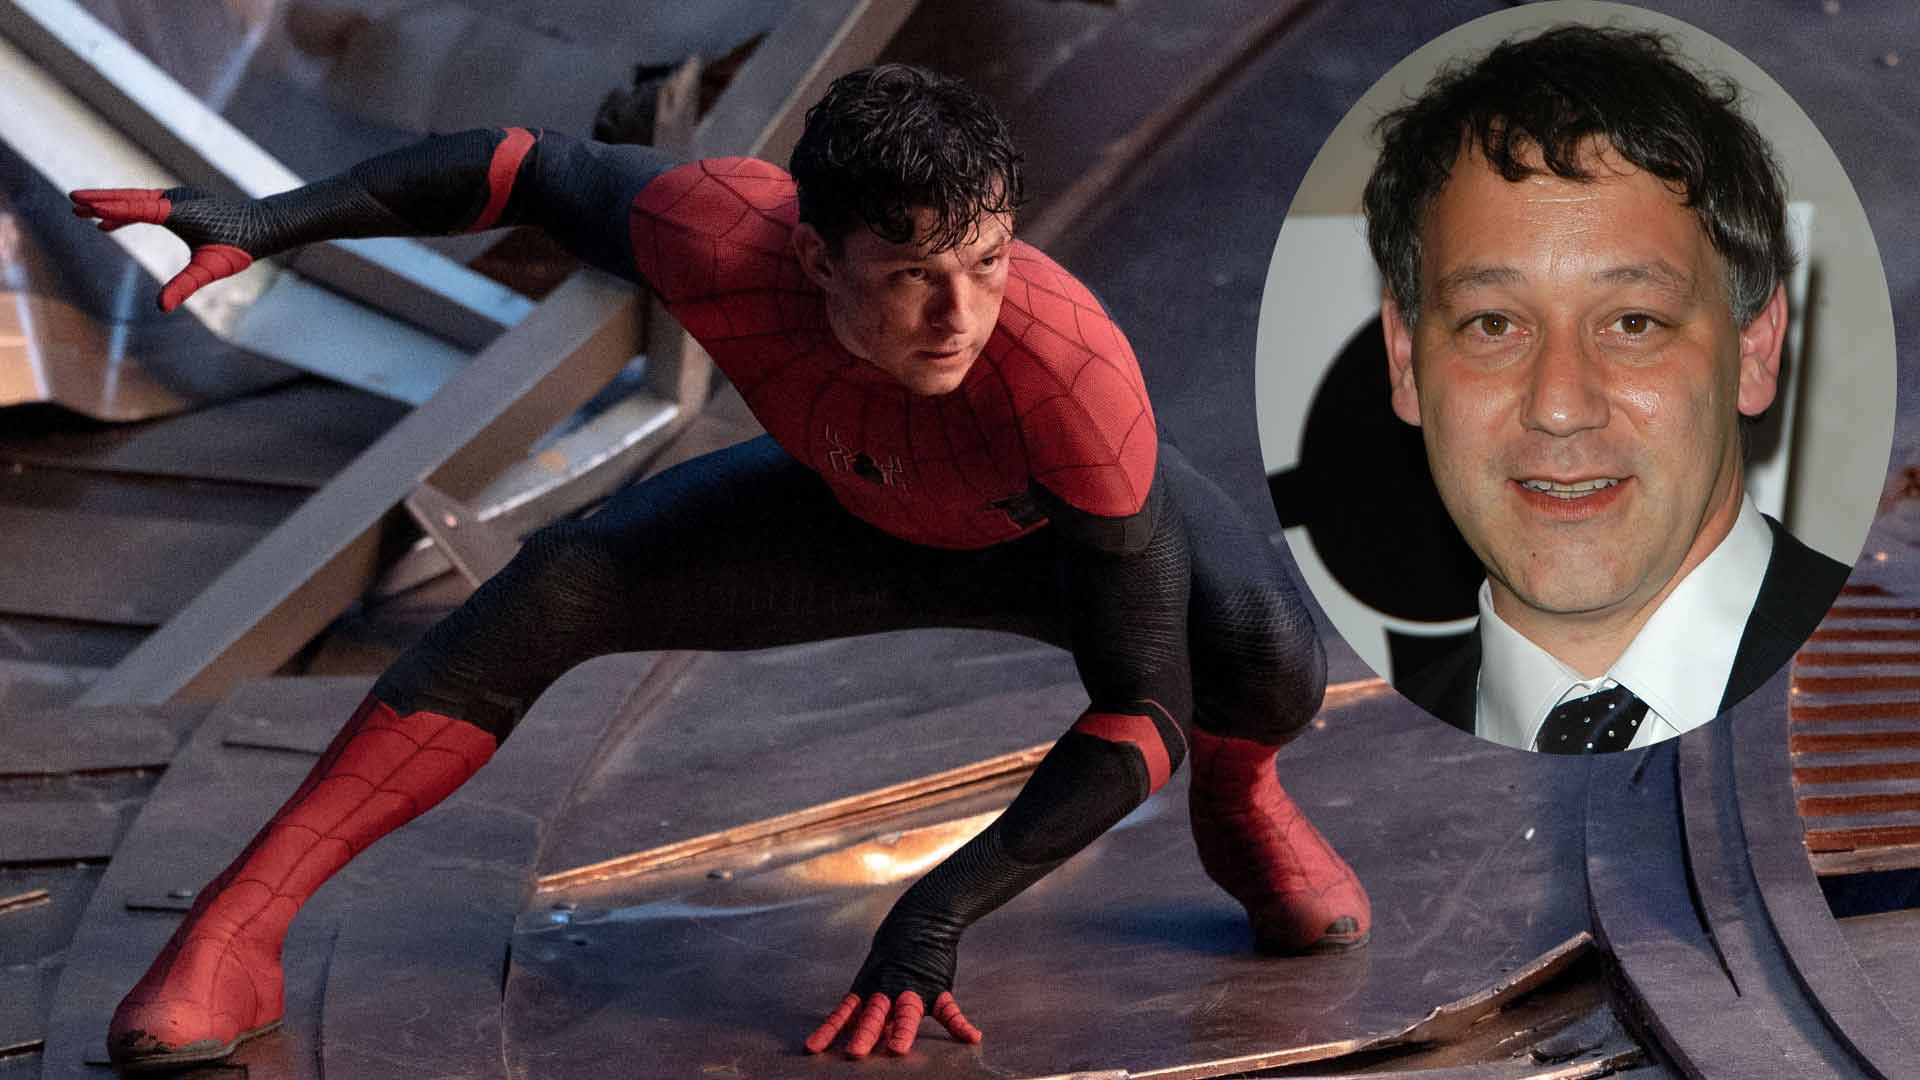 Sam Raimi Responds To Spider-Man: No Way Home: "It Was Refreshing For Me"